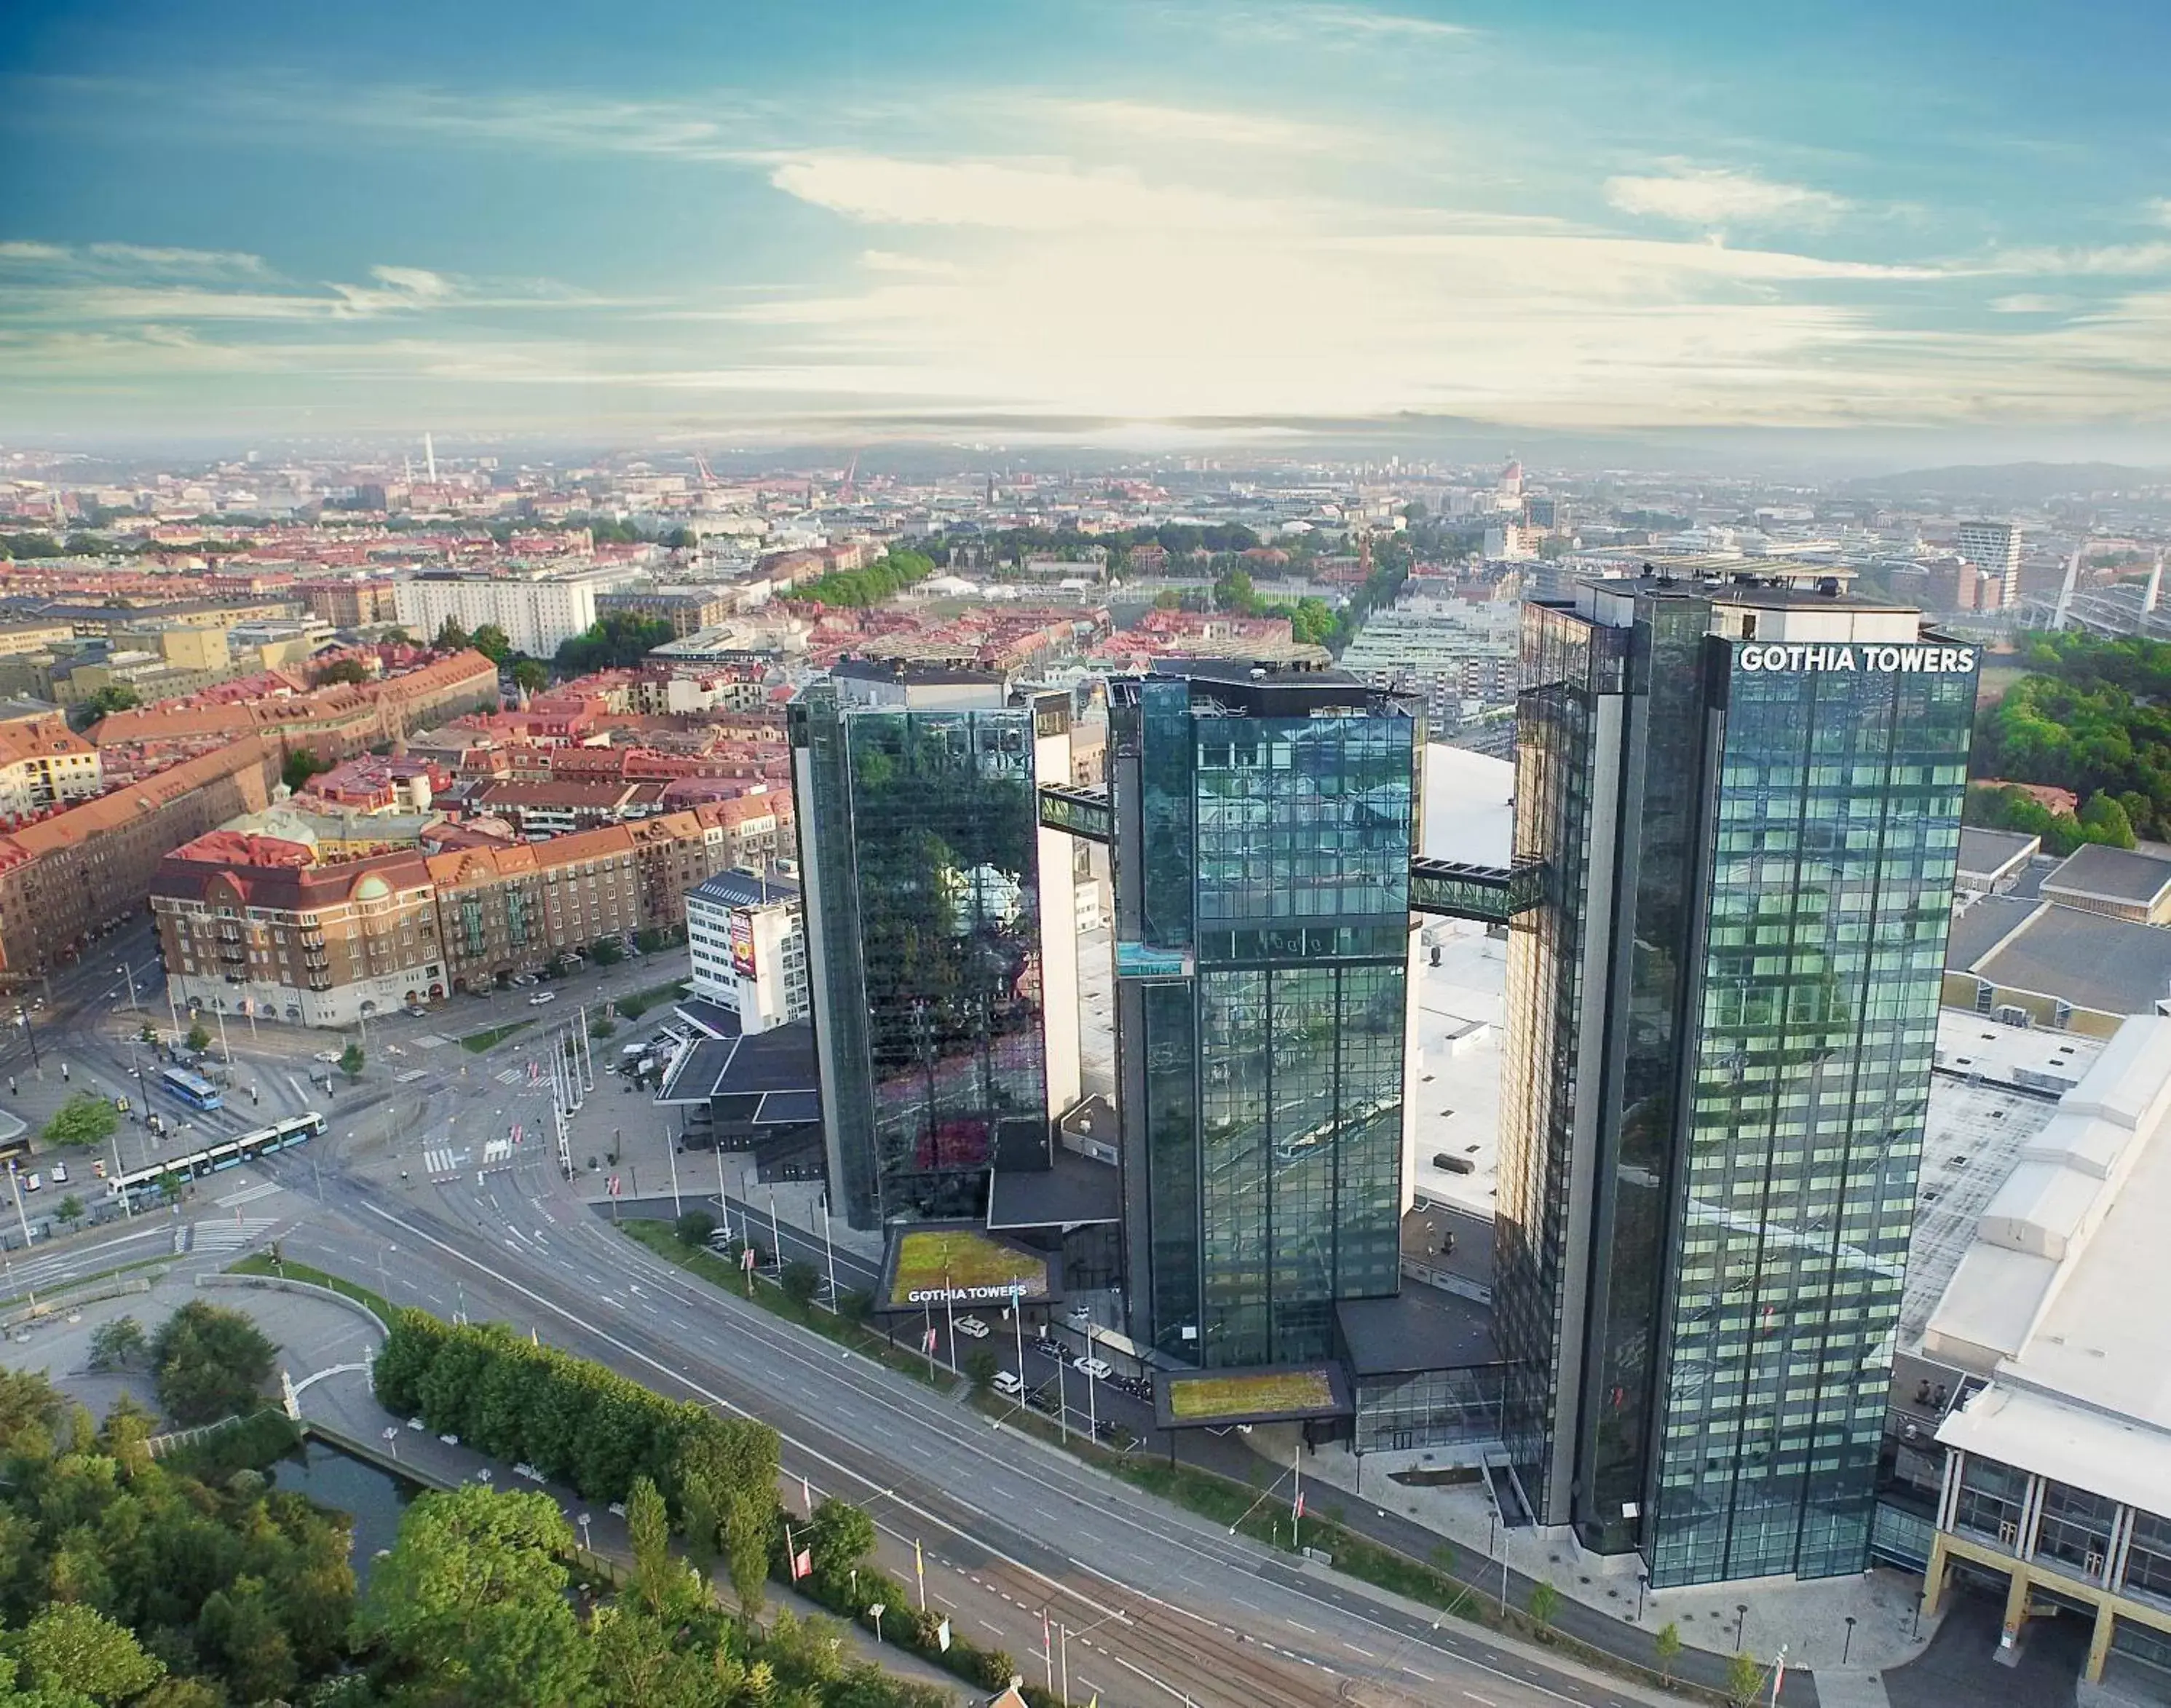 Property building, Bird's-eye View in Gothia Towers